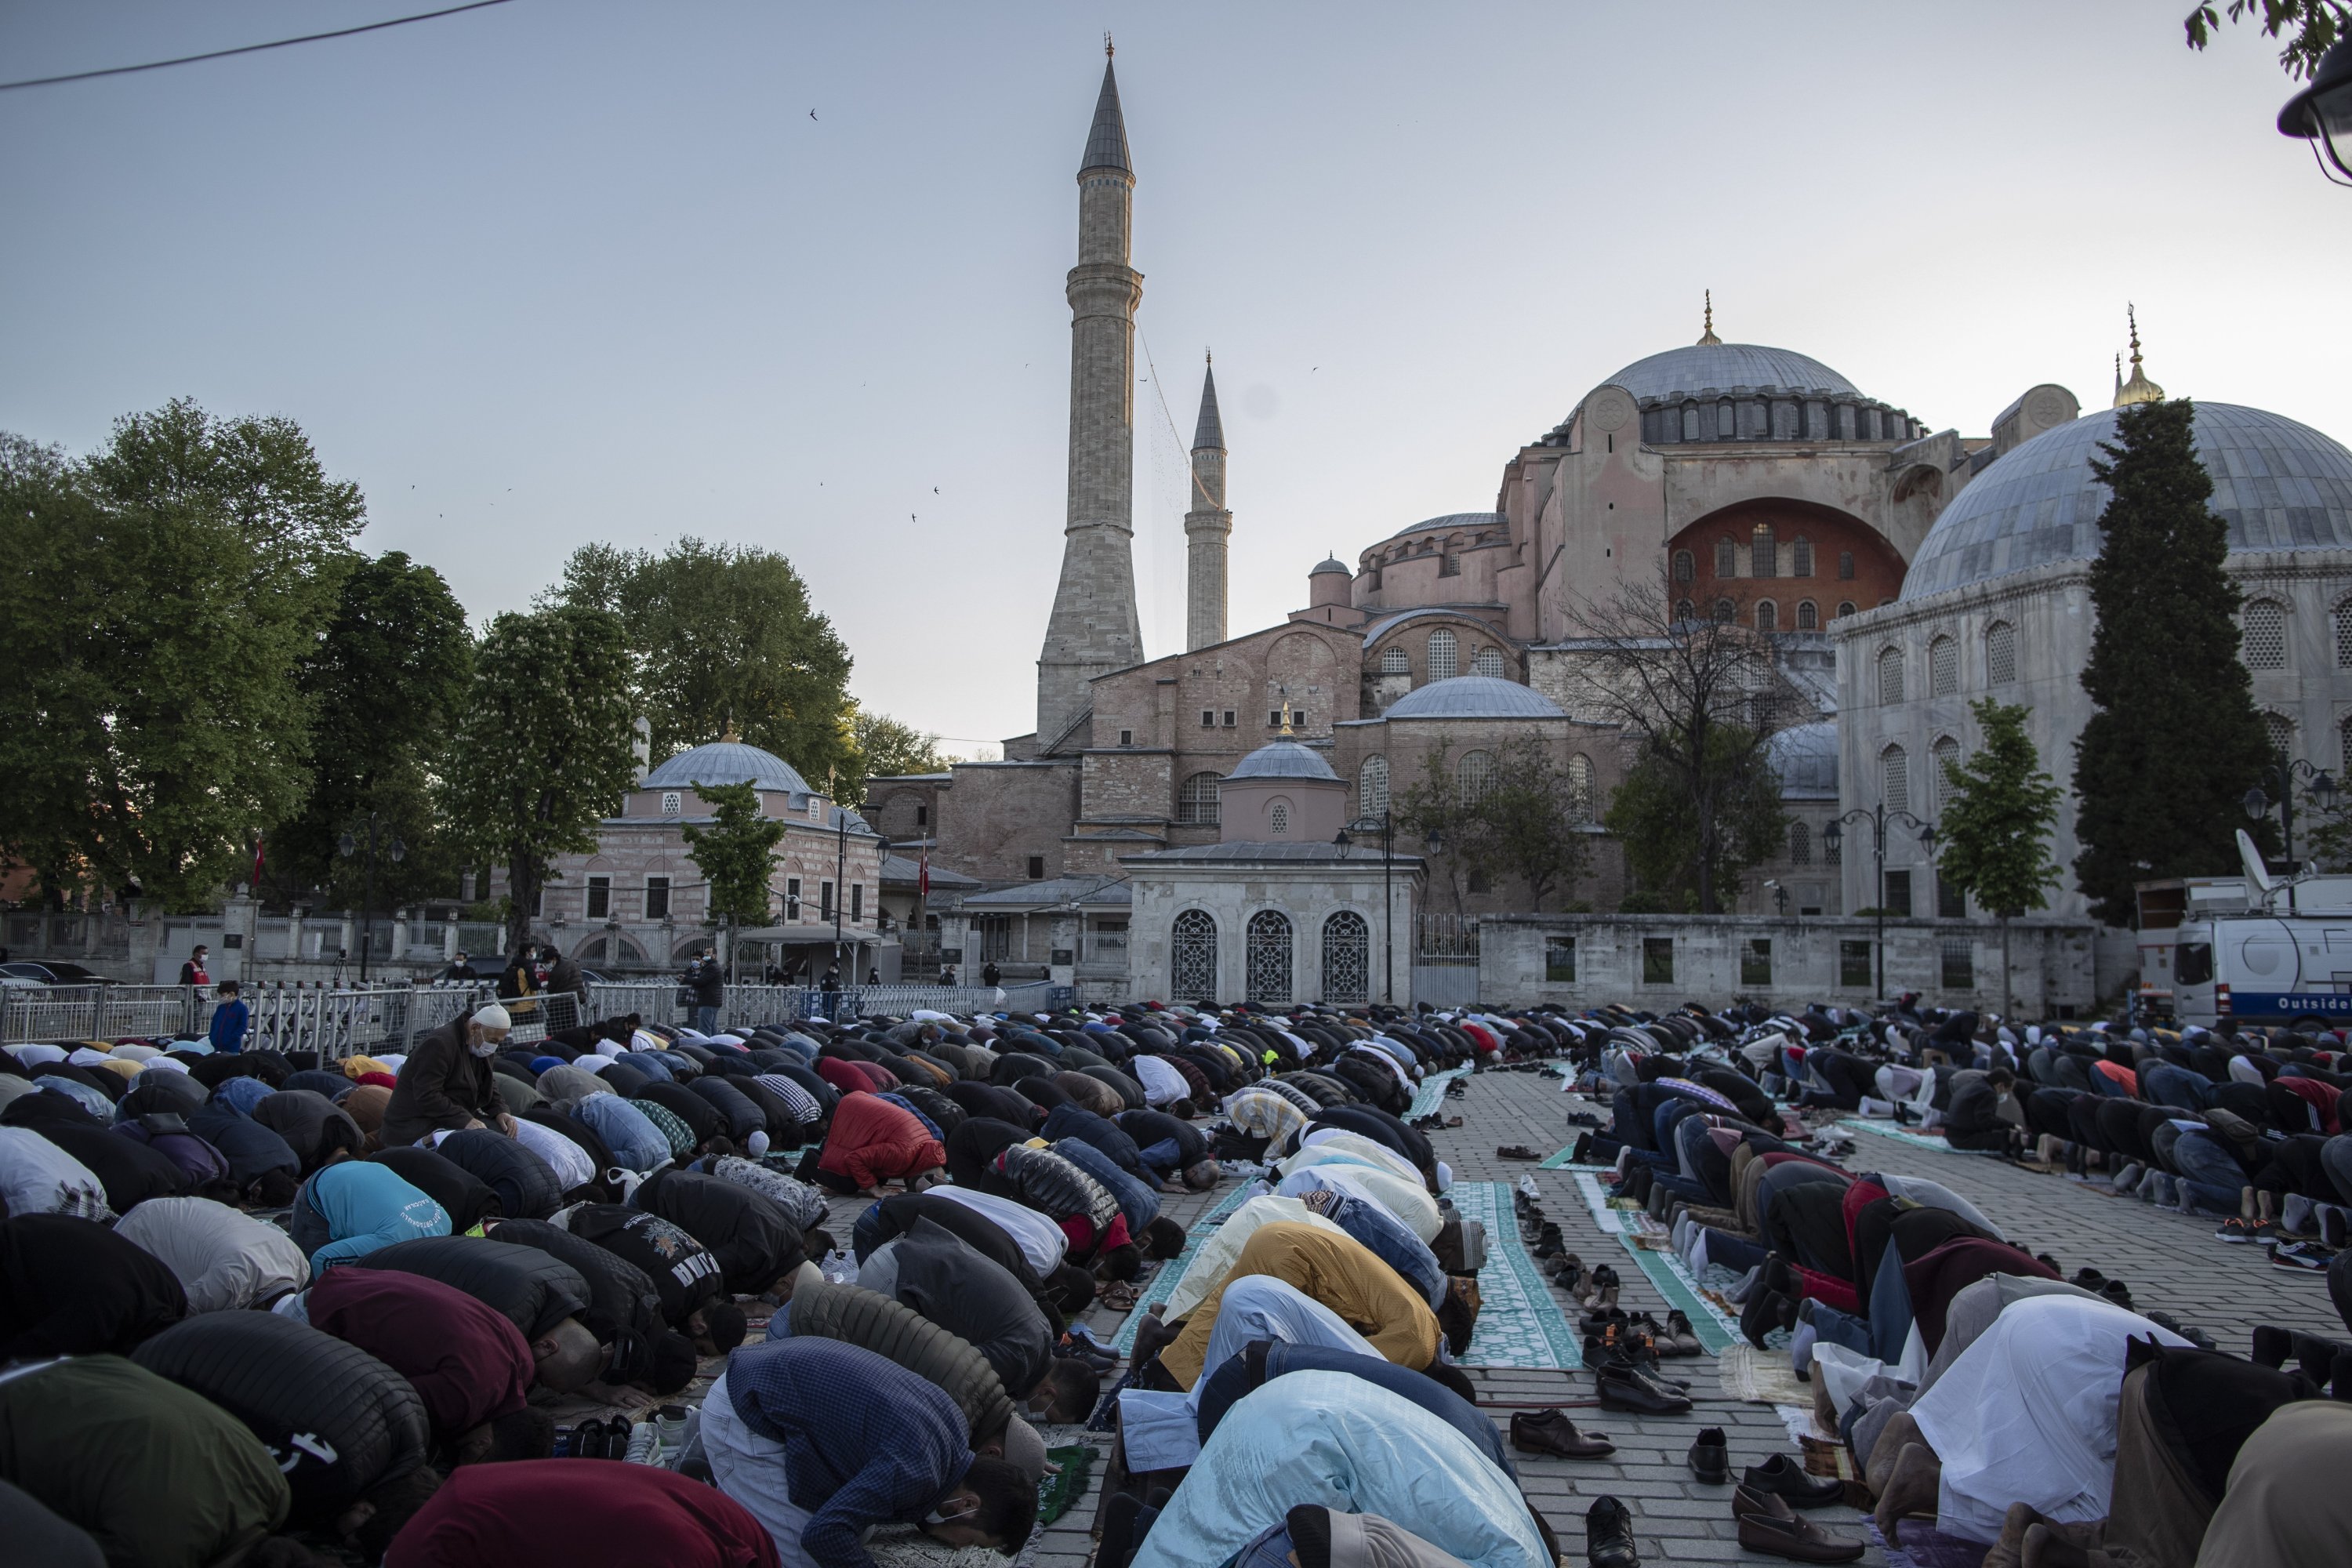 Muslims offer prayers during the first day of Eid al-Fitr, which marks the end of the holy month of Ramadan, outside the Hagia Sophia Grand Mosque in the historic Sultanahmet district of Istanbul, Turkey, May 13, 2021. (AP Photo)